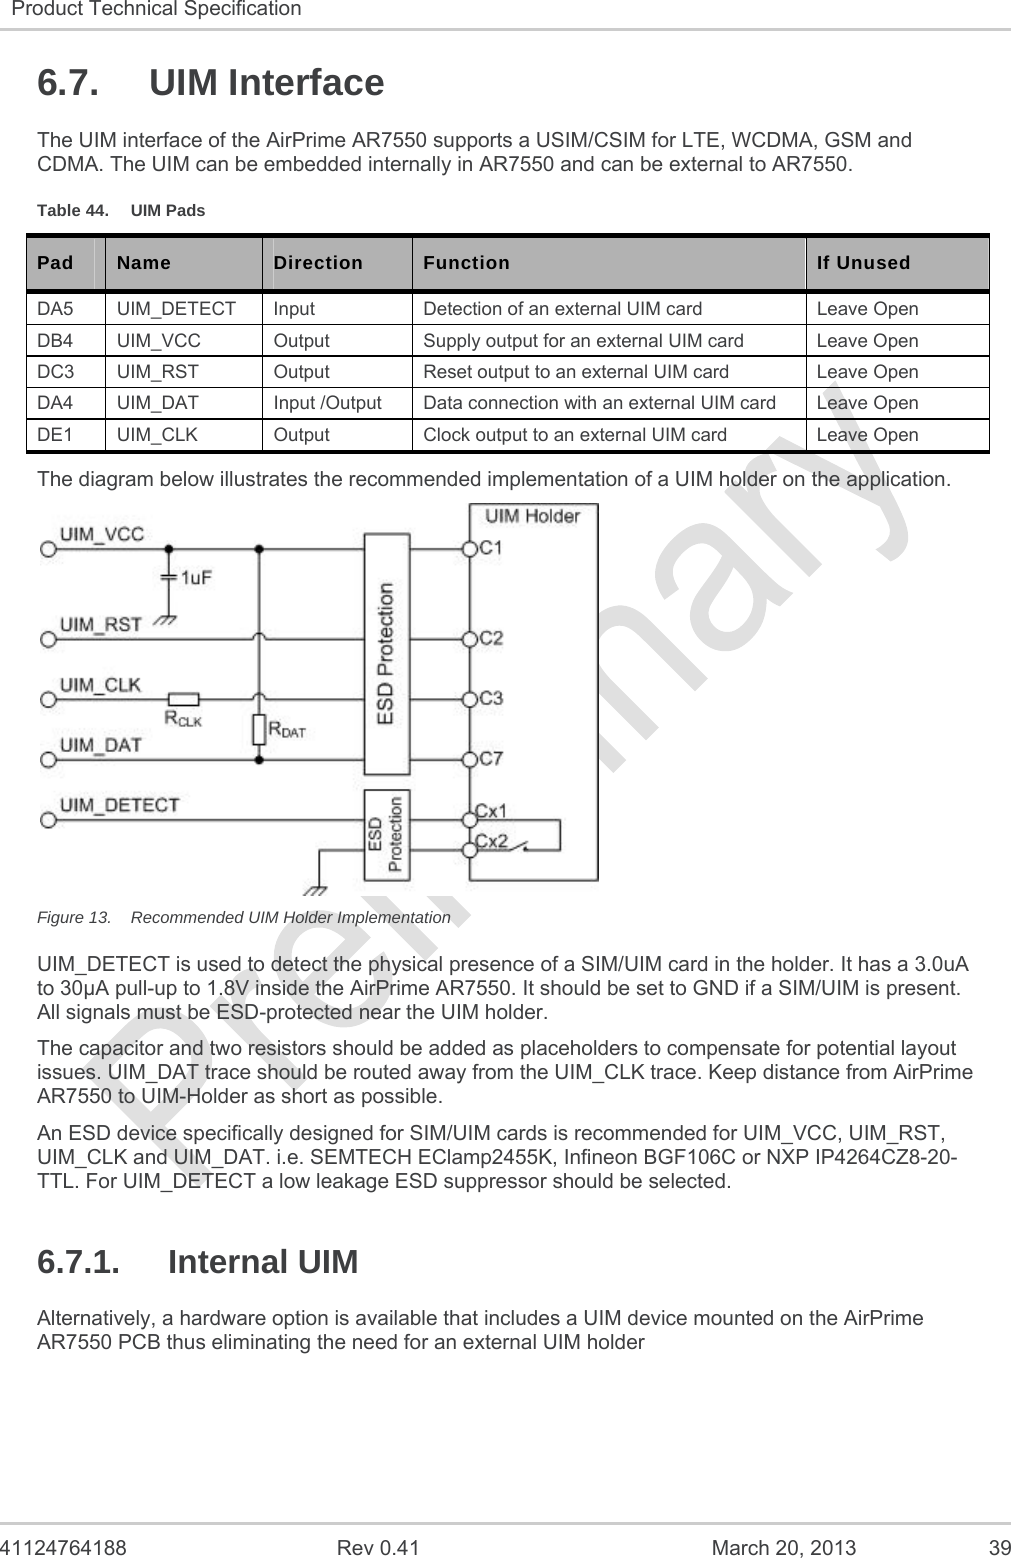   41124764188  Rev 0.41  March 20, 2013  39 Product Technical Specification   6.7. UIM Interface The UIM interface of the AirPrime AR7550 supports a USIM/CSIM for LTE, WCDMA, GSM and CDMA. The UIM can be embedded internally in AR7550 and can be external to AR7550. Table 44.  UIM Pads Pad  Name  Direction  Function  If Unused DA5 UIM_DETECT Input  Detection of an external UIM card  Leave Open DB4 UIM_VCC  Output  Supply output for an external UIM card  Leave Open DC3  UIM_RST  Output  Reset output to an external UIM card  Leave Open DA4  UIM_DAT  Input /Output  Data connection with an external UIM card  Leave Open DE1  UIM_CLK  Output  Clock output to an external UIM card  Leave Open The diagram below illustrates the recommended implementation of a UIM holder on the application.  Figure 13.  Recommended UIM Holder Implementation UIM_DETECT is used to detect the physical presence of a SIM/UIM card in the holder. It has a 3.0uA to 30µA pull-up to 1.8V inside the AirPrime AR7550. It should be set to GND if a SIM/UIM is present.  All signals must be ESD-protected near the UIM holder. The capacitor and two resistors should be added as placeholders to compensate for potential layout issues. UIM_DAT trace should be routed away from the UIM_CLK trace. Keep distance from AirPrime AR7550 to UIM-Holder as short as possible. An ESD device specifically designed for SIM/UIM cards is recommended for UIM_VCC, UIM_RST, UIM_CLK and UIM_DAT. i.e. SEMTECH EClamp2455K, Infineon BGF106C or NXP IP4264CZ8-20-TTL. For UIM_DETECT a low leakage ESD suppressor should be selected. 6.7.1. Internal UIM Alternatively, a hardware option is available that includes a UIM device mounted on the AirPrime AR7550 PCB thus eliminating the need for an external UIM holder   